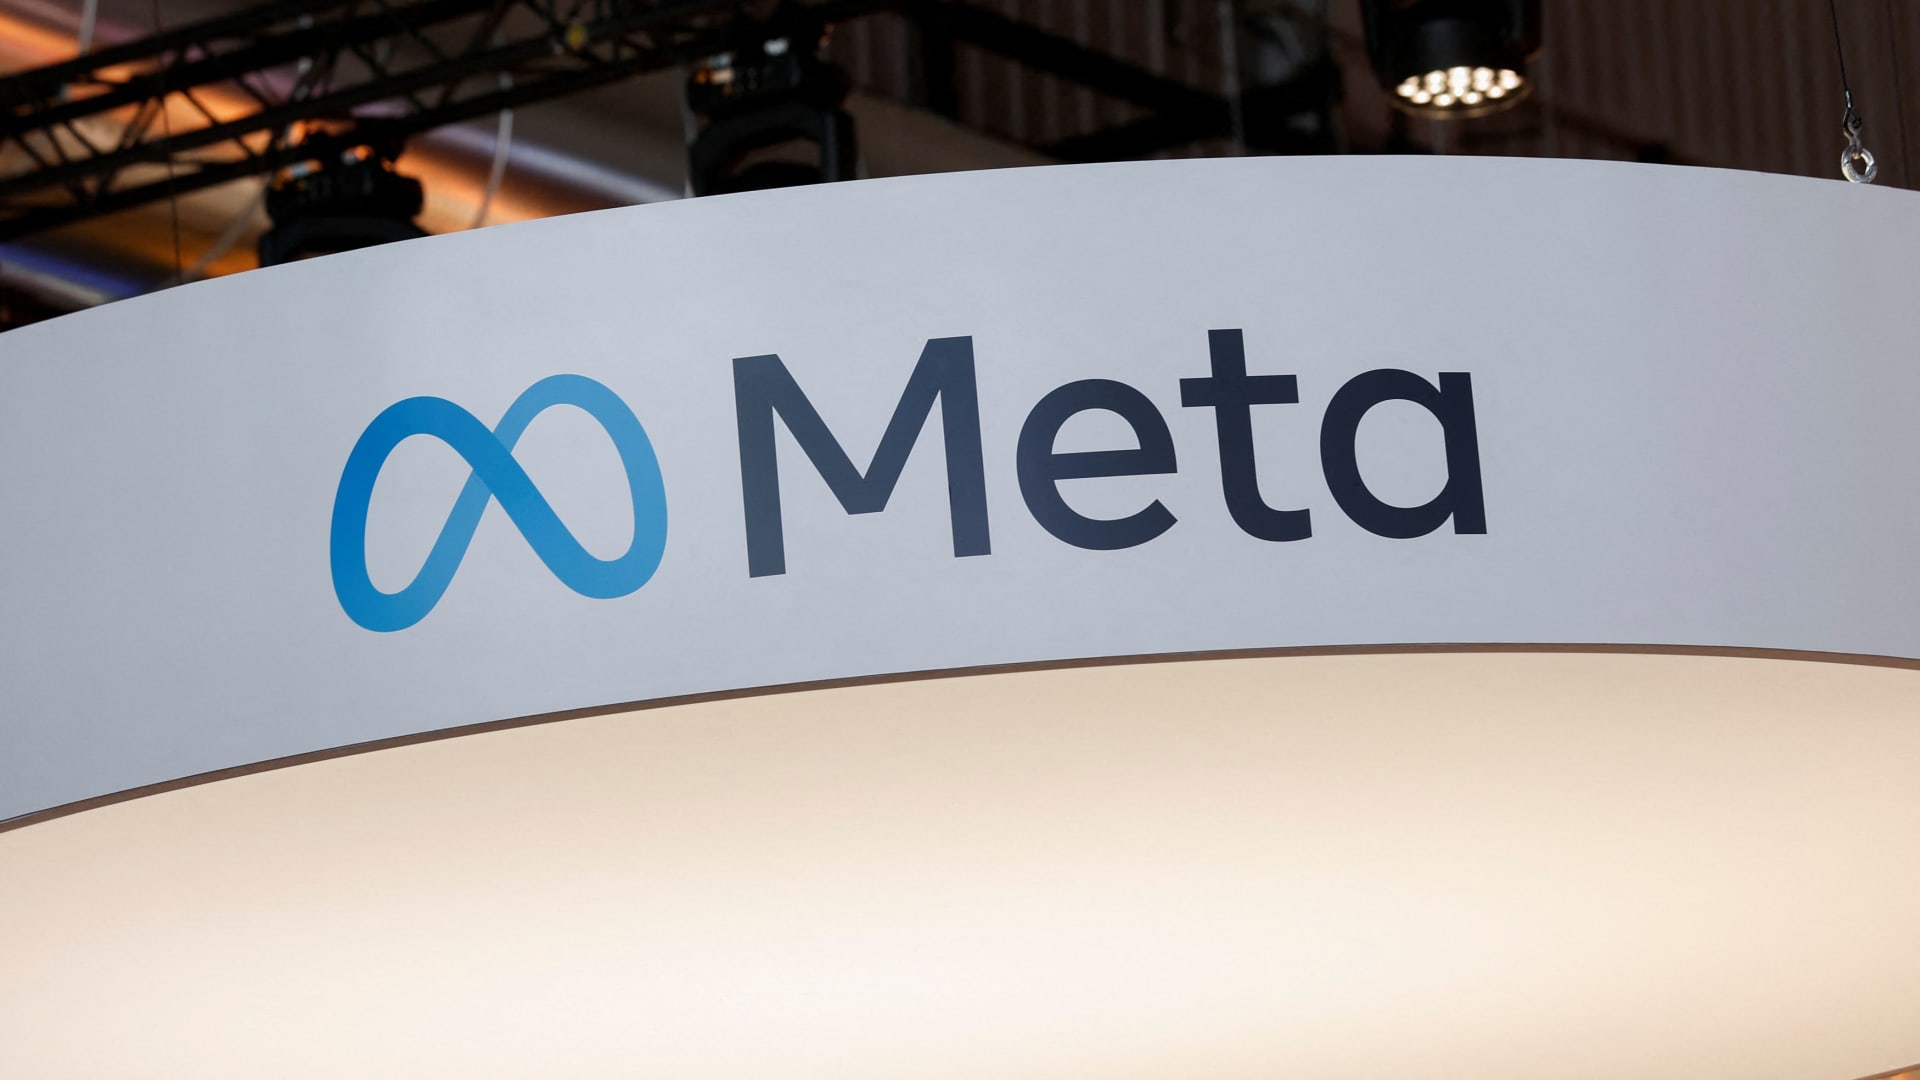 A logo of Meta Platforms Inc. is seen at its booth, at the Viva Technology conference dedicated to innovation and startups, at Porte de Versailles exhibition center in Paris, France June 17, 2022.